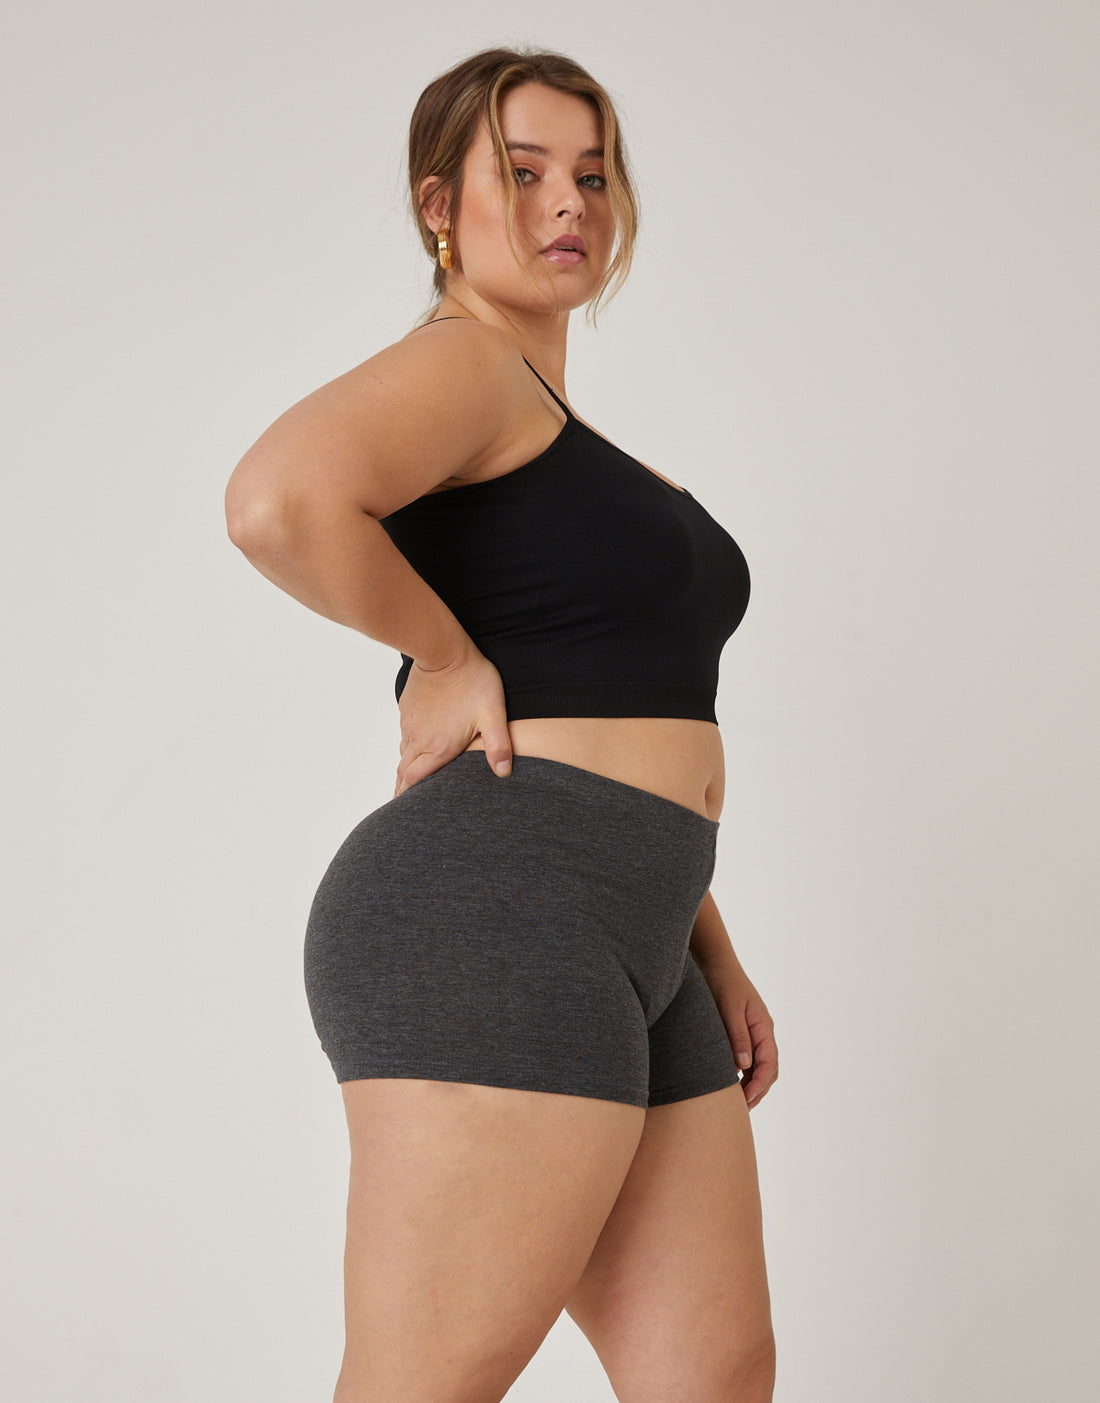 Plus Size Barely There Shorts Plus Size Slip Shorts 2020ave